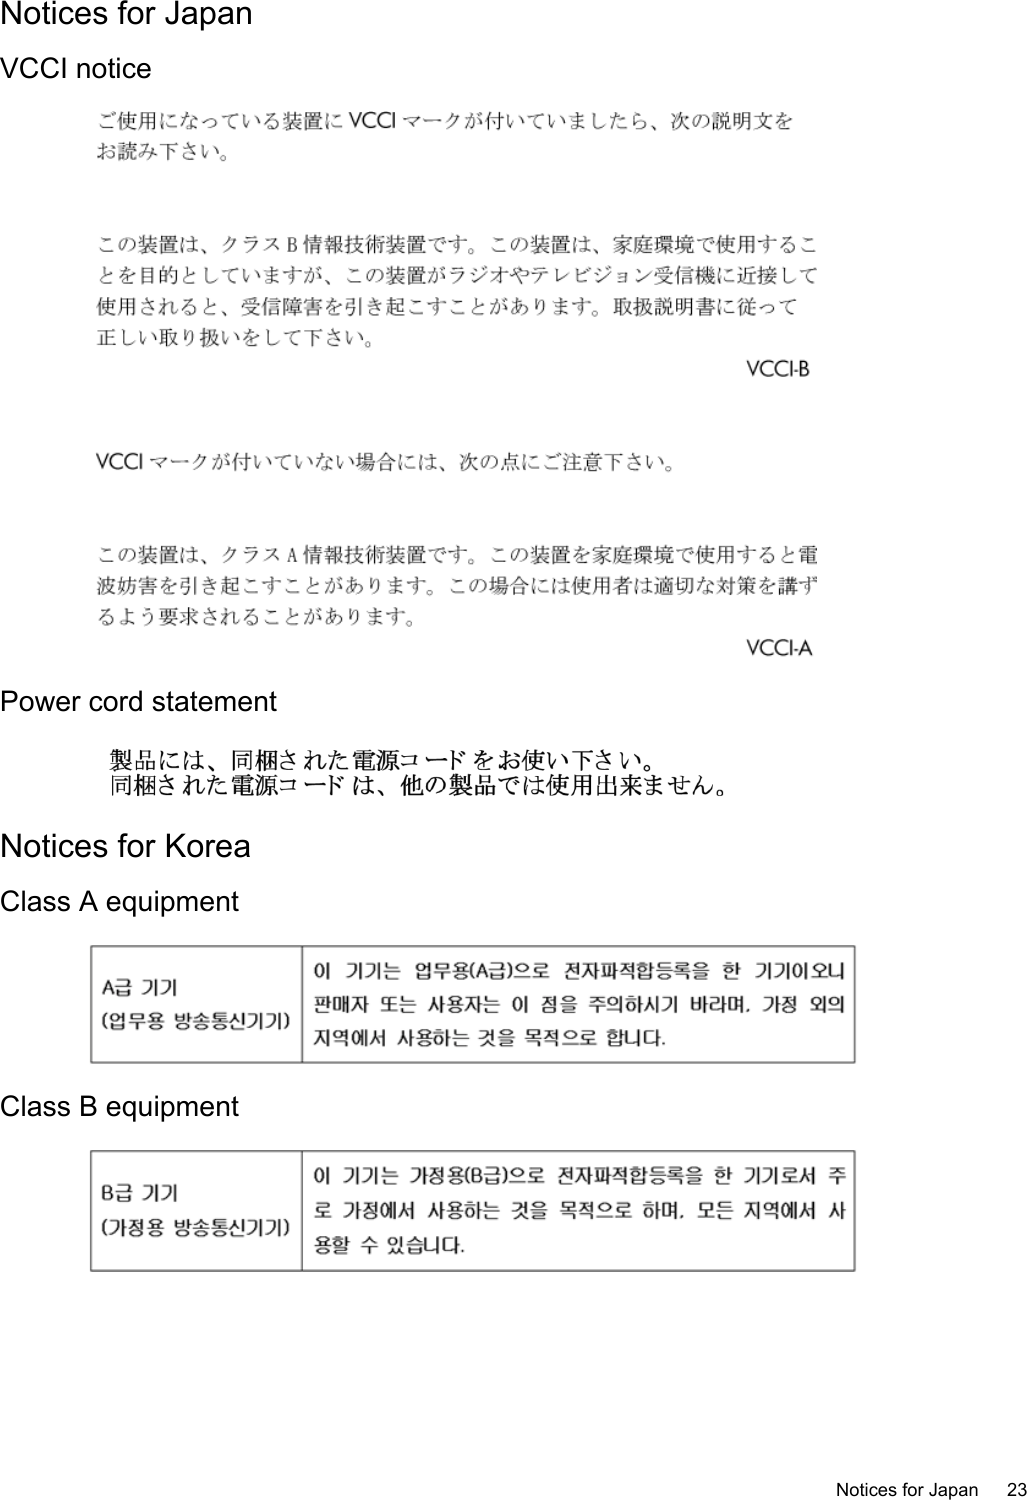 Notices for JapanVCCI noticePower cord statementNotices for KoreaClass A equipmentClass B equipmentNotices for Japan 23